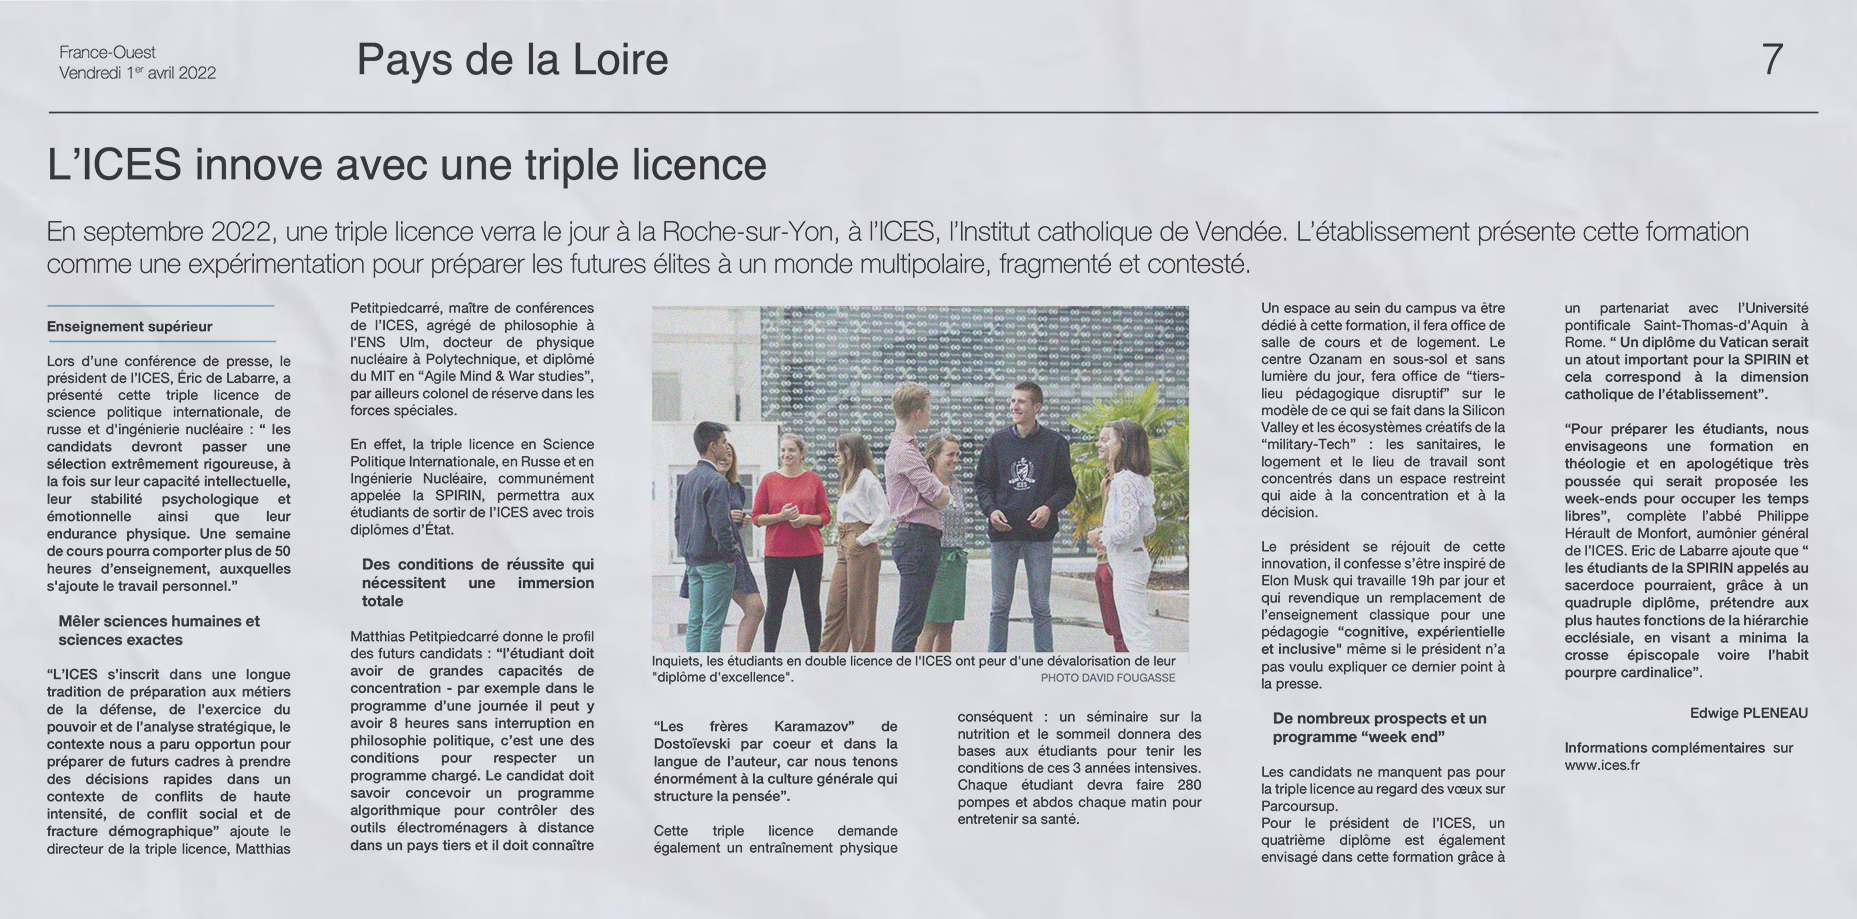 Article OF 1er Avril 2022 ICES Triple Licence